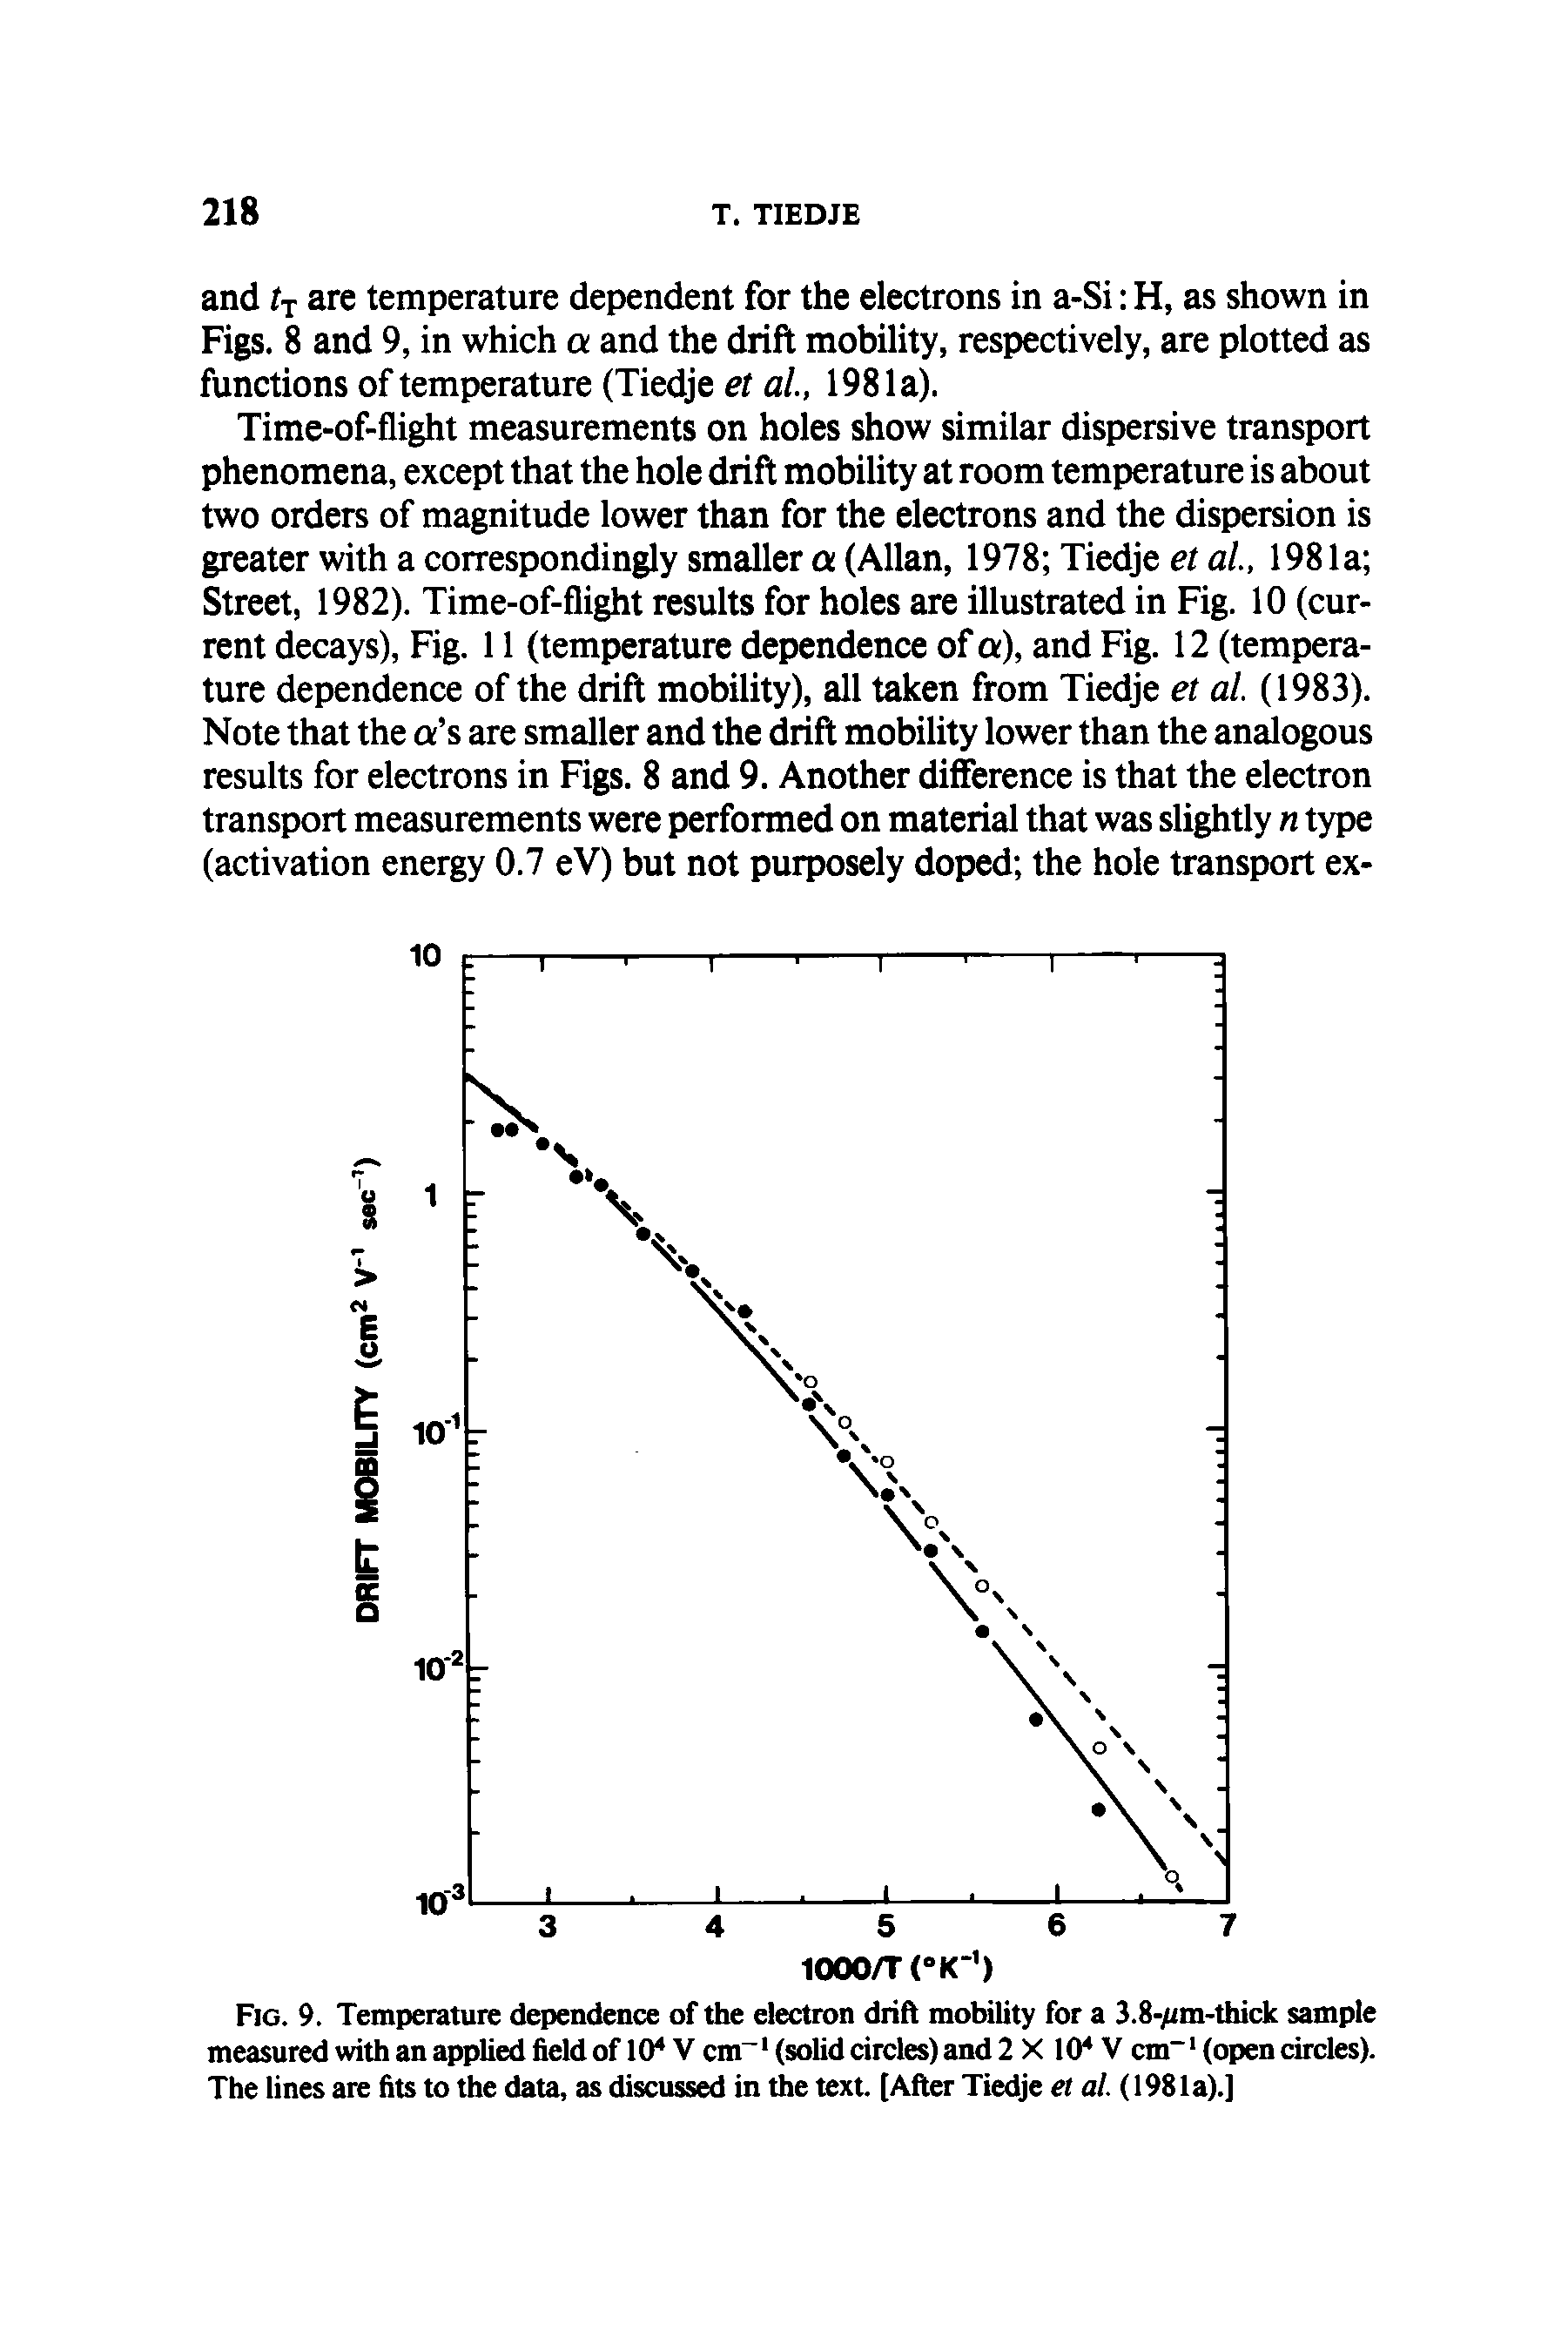 Fig. 9. Temperature dependence of the electron drift mobility for a 3.8-/im-thick sample measuredwithanappliedfieldof 10 Vcm (solid circles) and 2 X 10 V cm (open circles). The lines are fits to the data, as discussed in the text. [After Tiedje et at. (1981a).]...